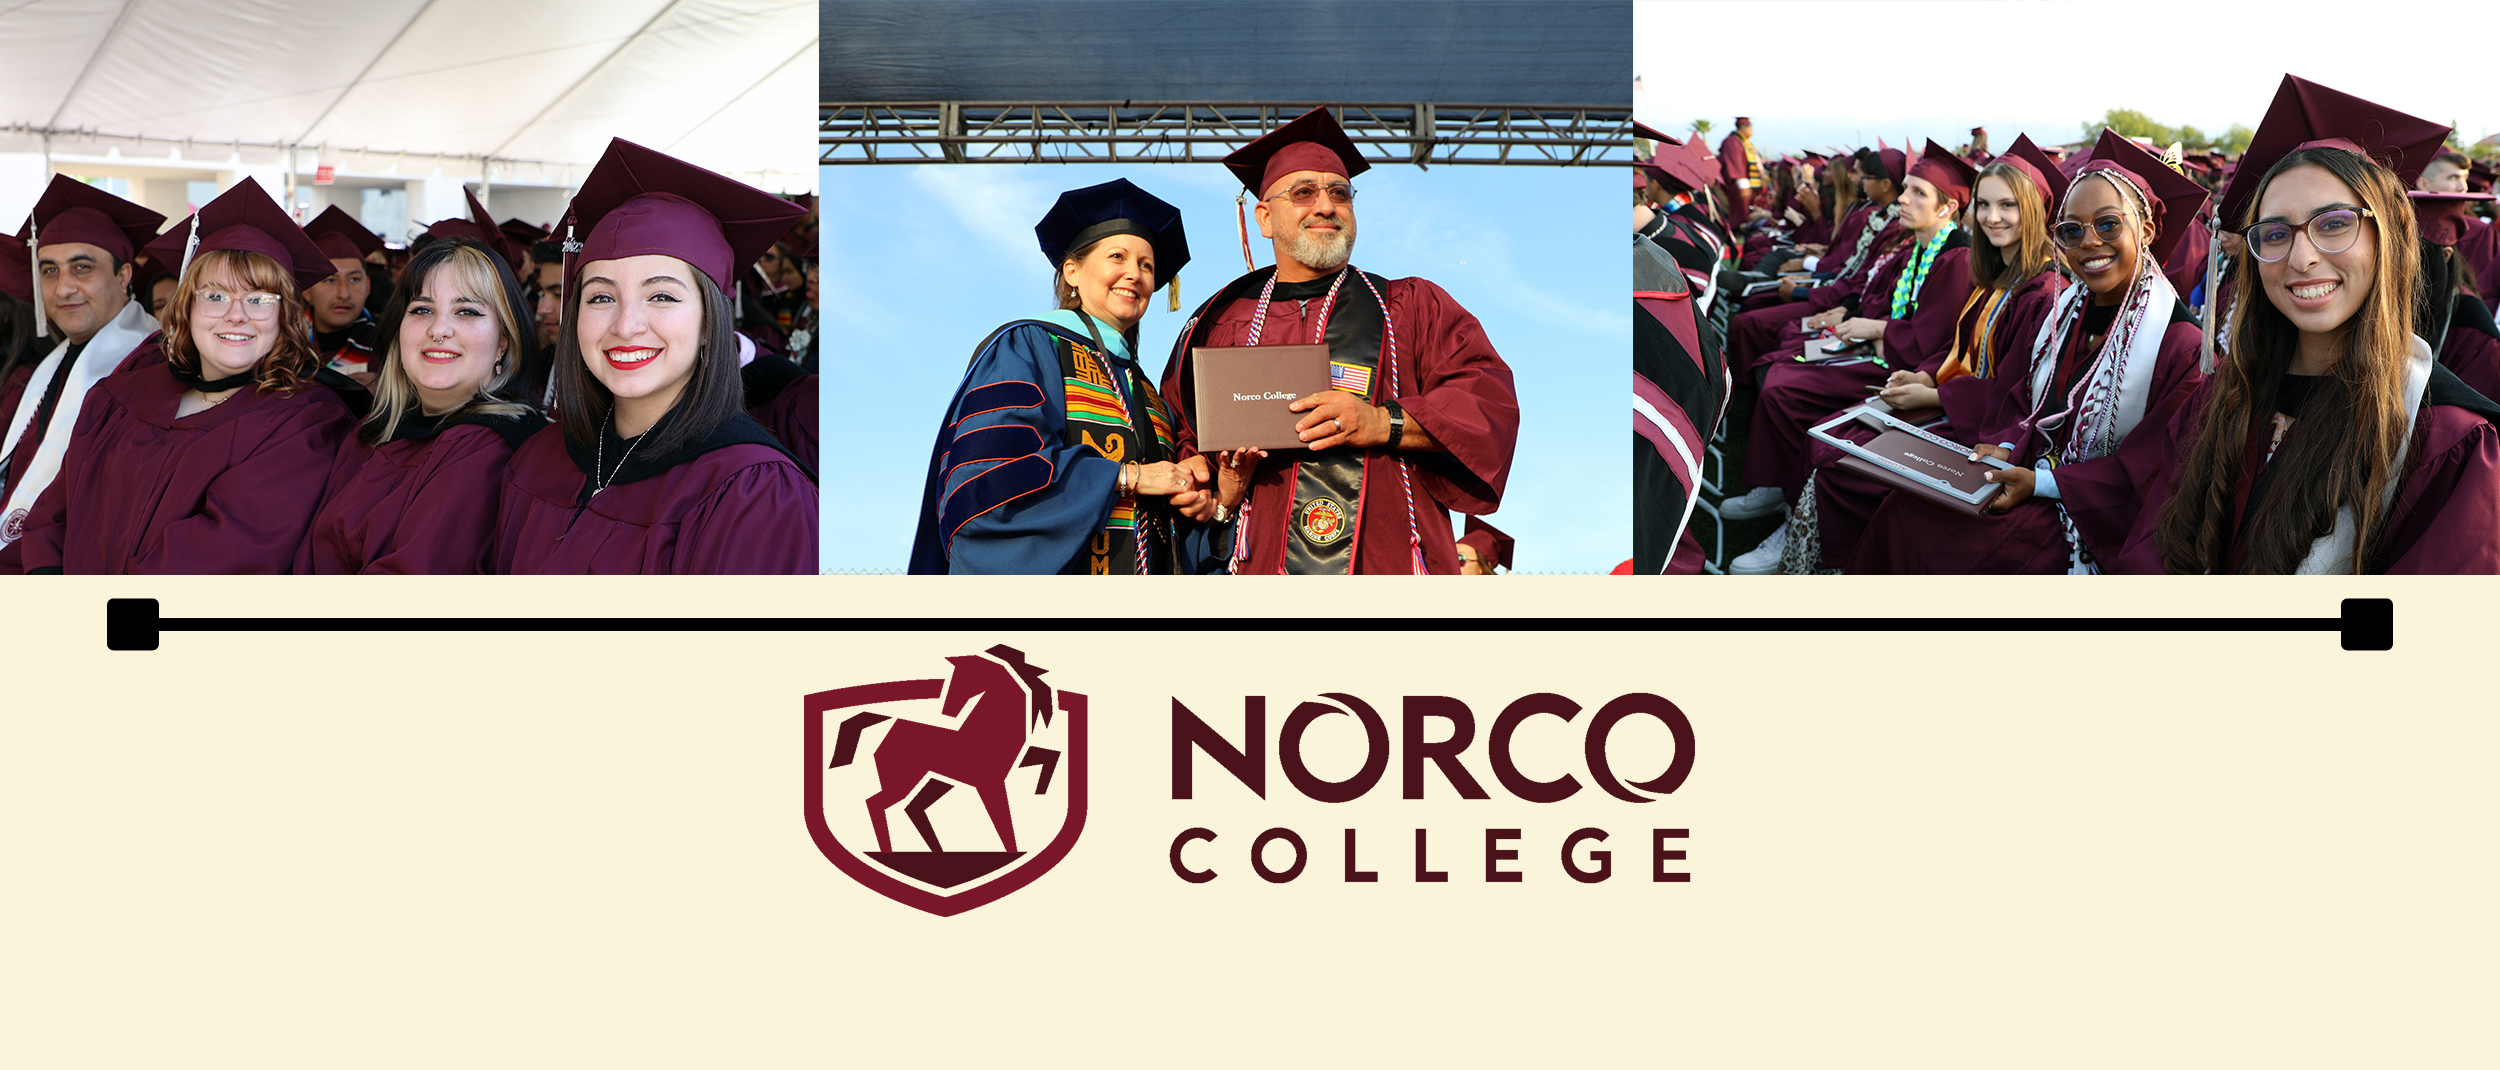 NORCO COLLEGE. June 12, PDF Free Download